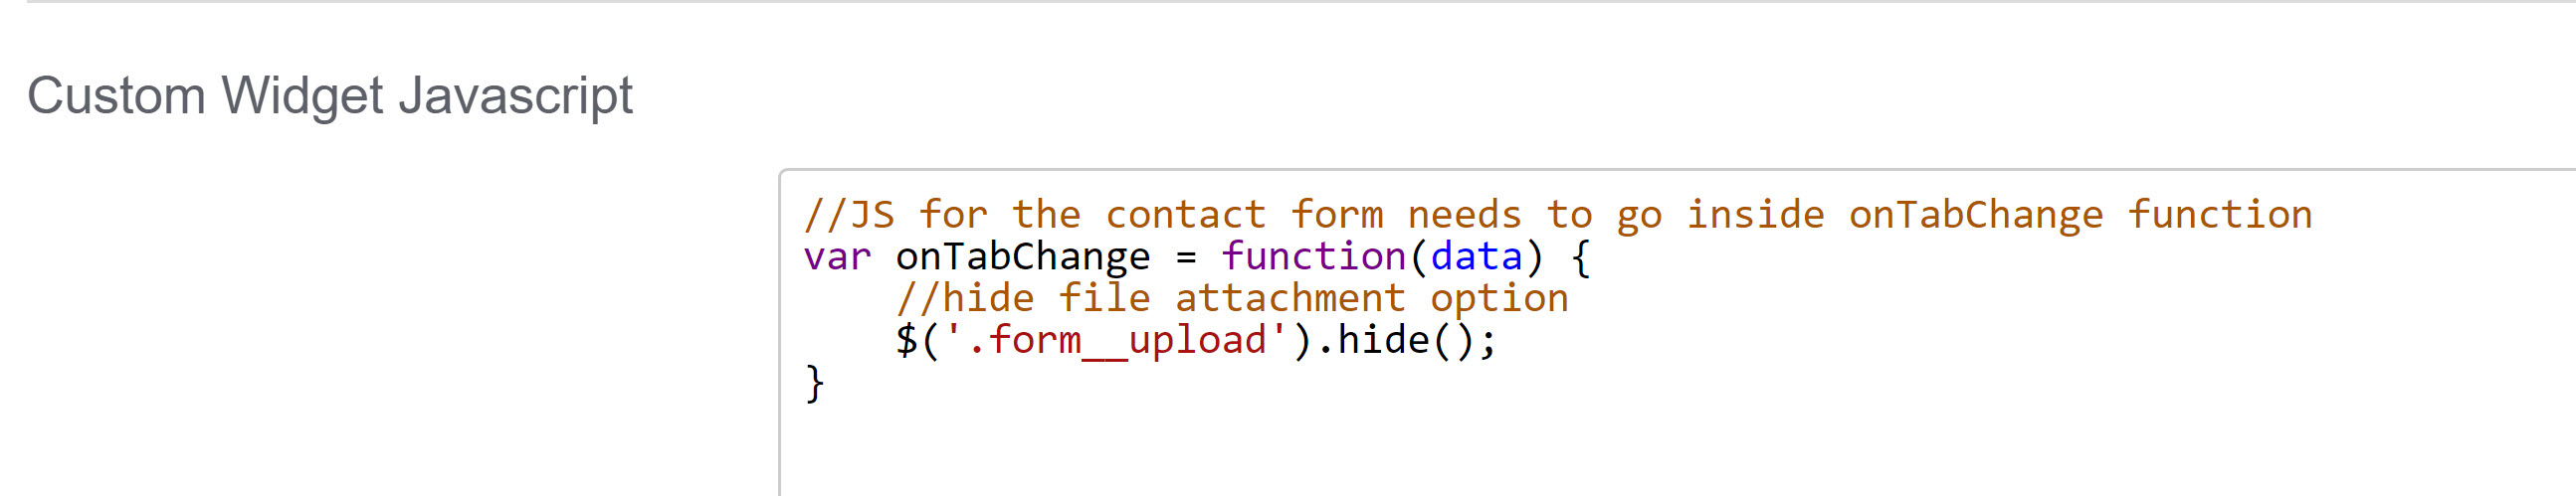 Screenshot showing sample custom widget Javascript to hide the file attachment option in the contact tab